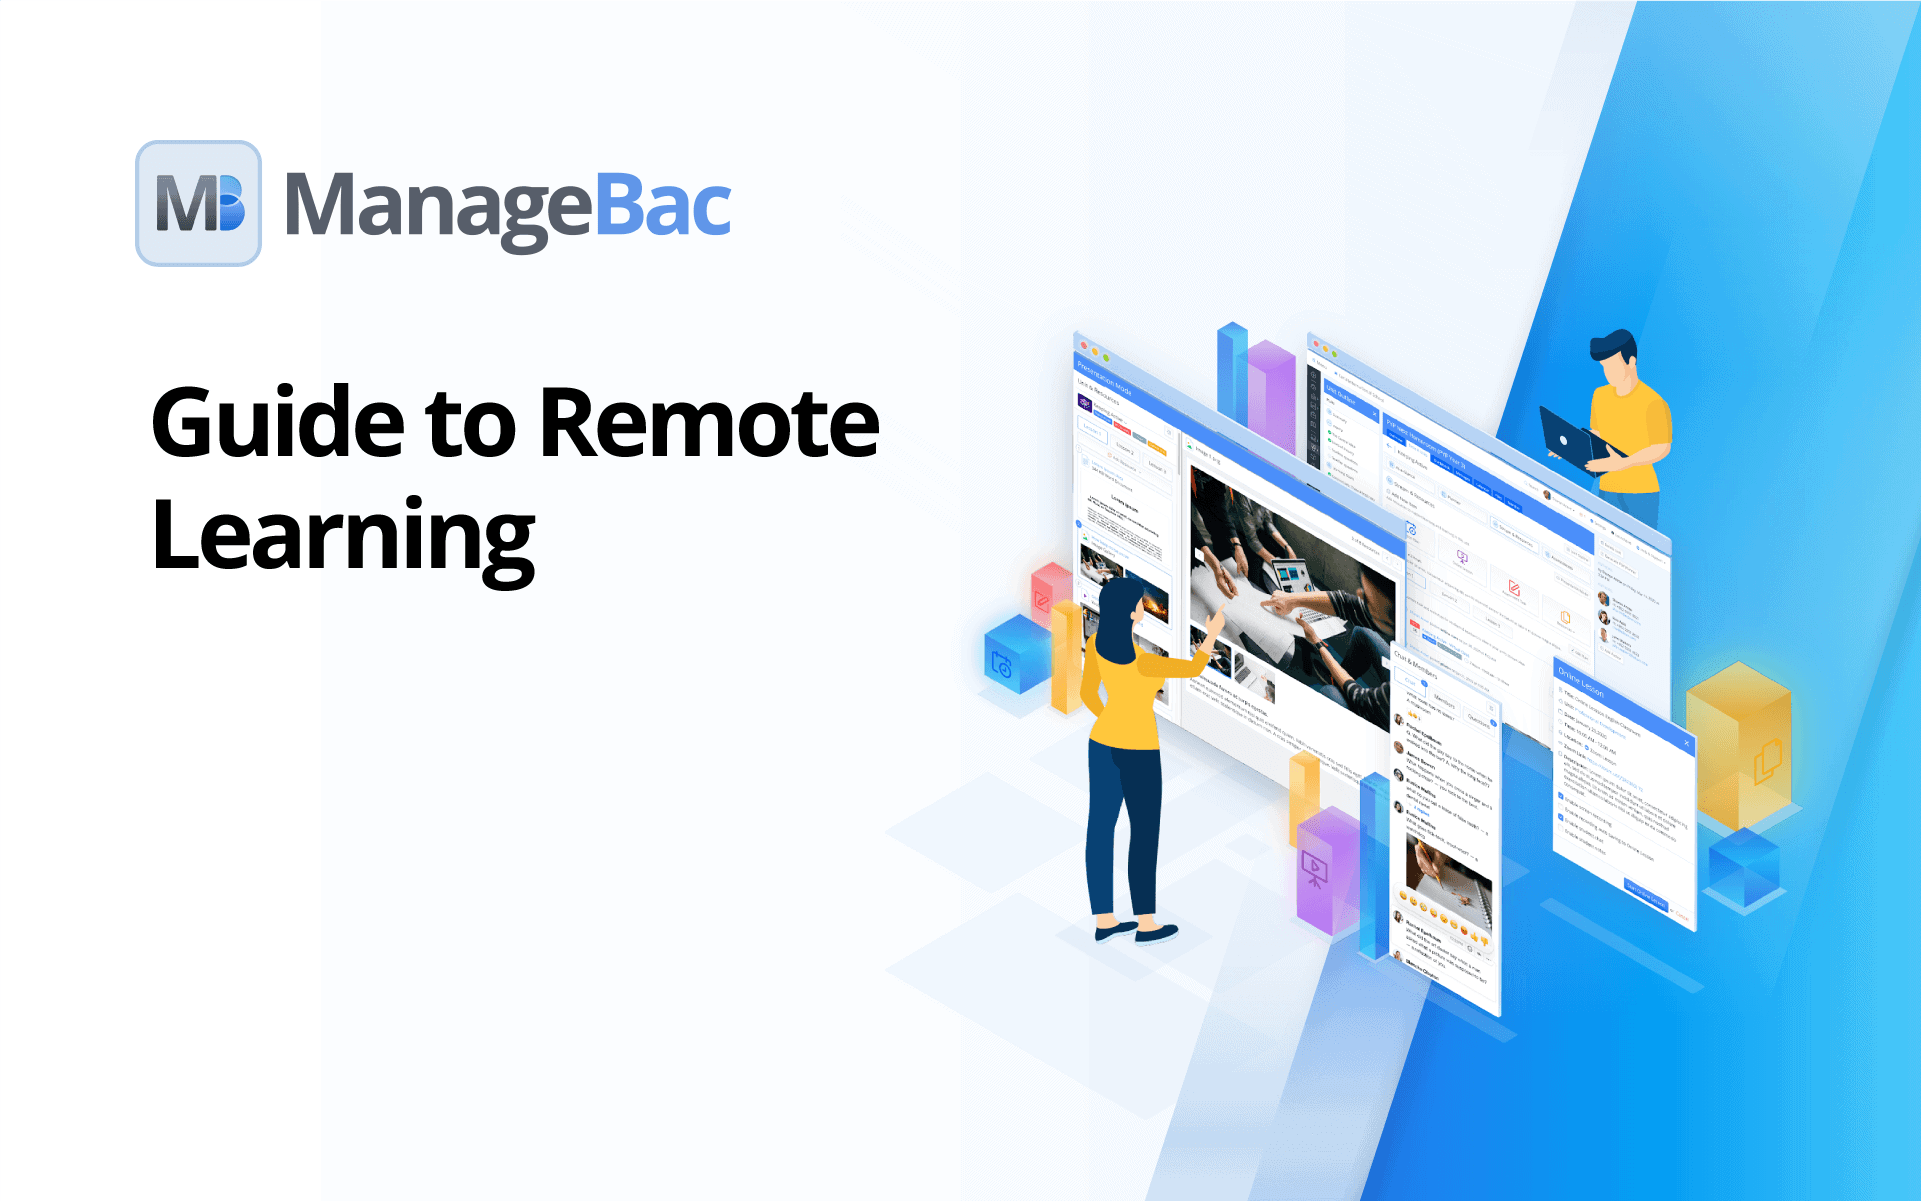 A Guide to Remote Learning in ManageBac